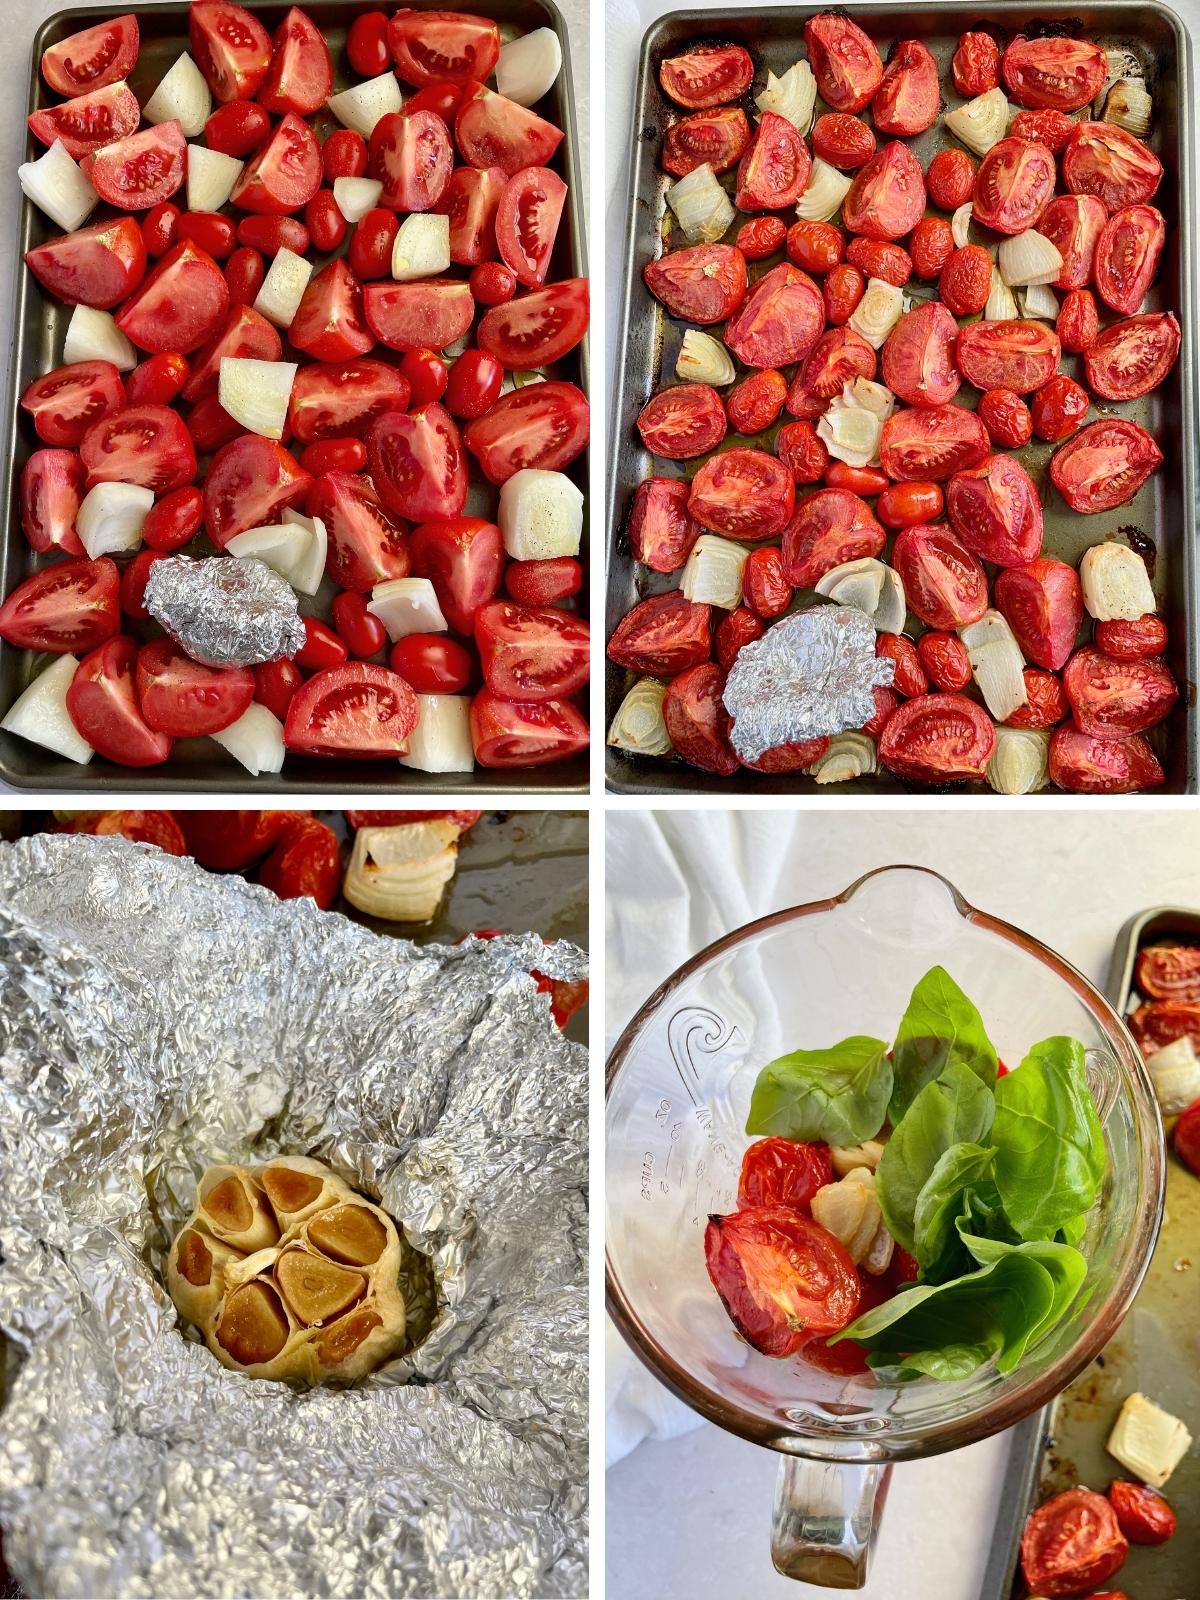 Process steps for roasted tomato soup.